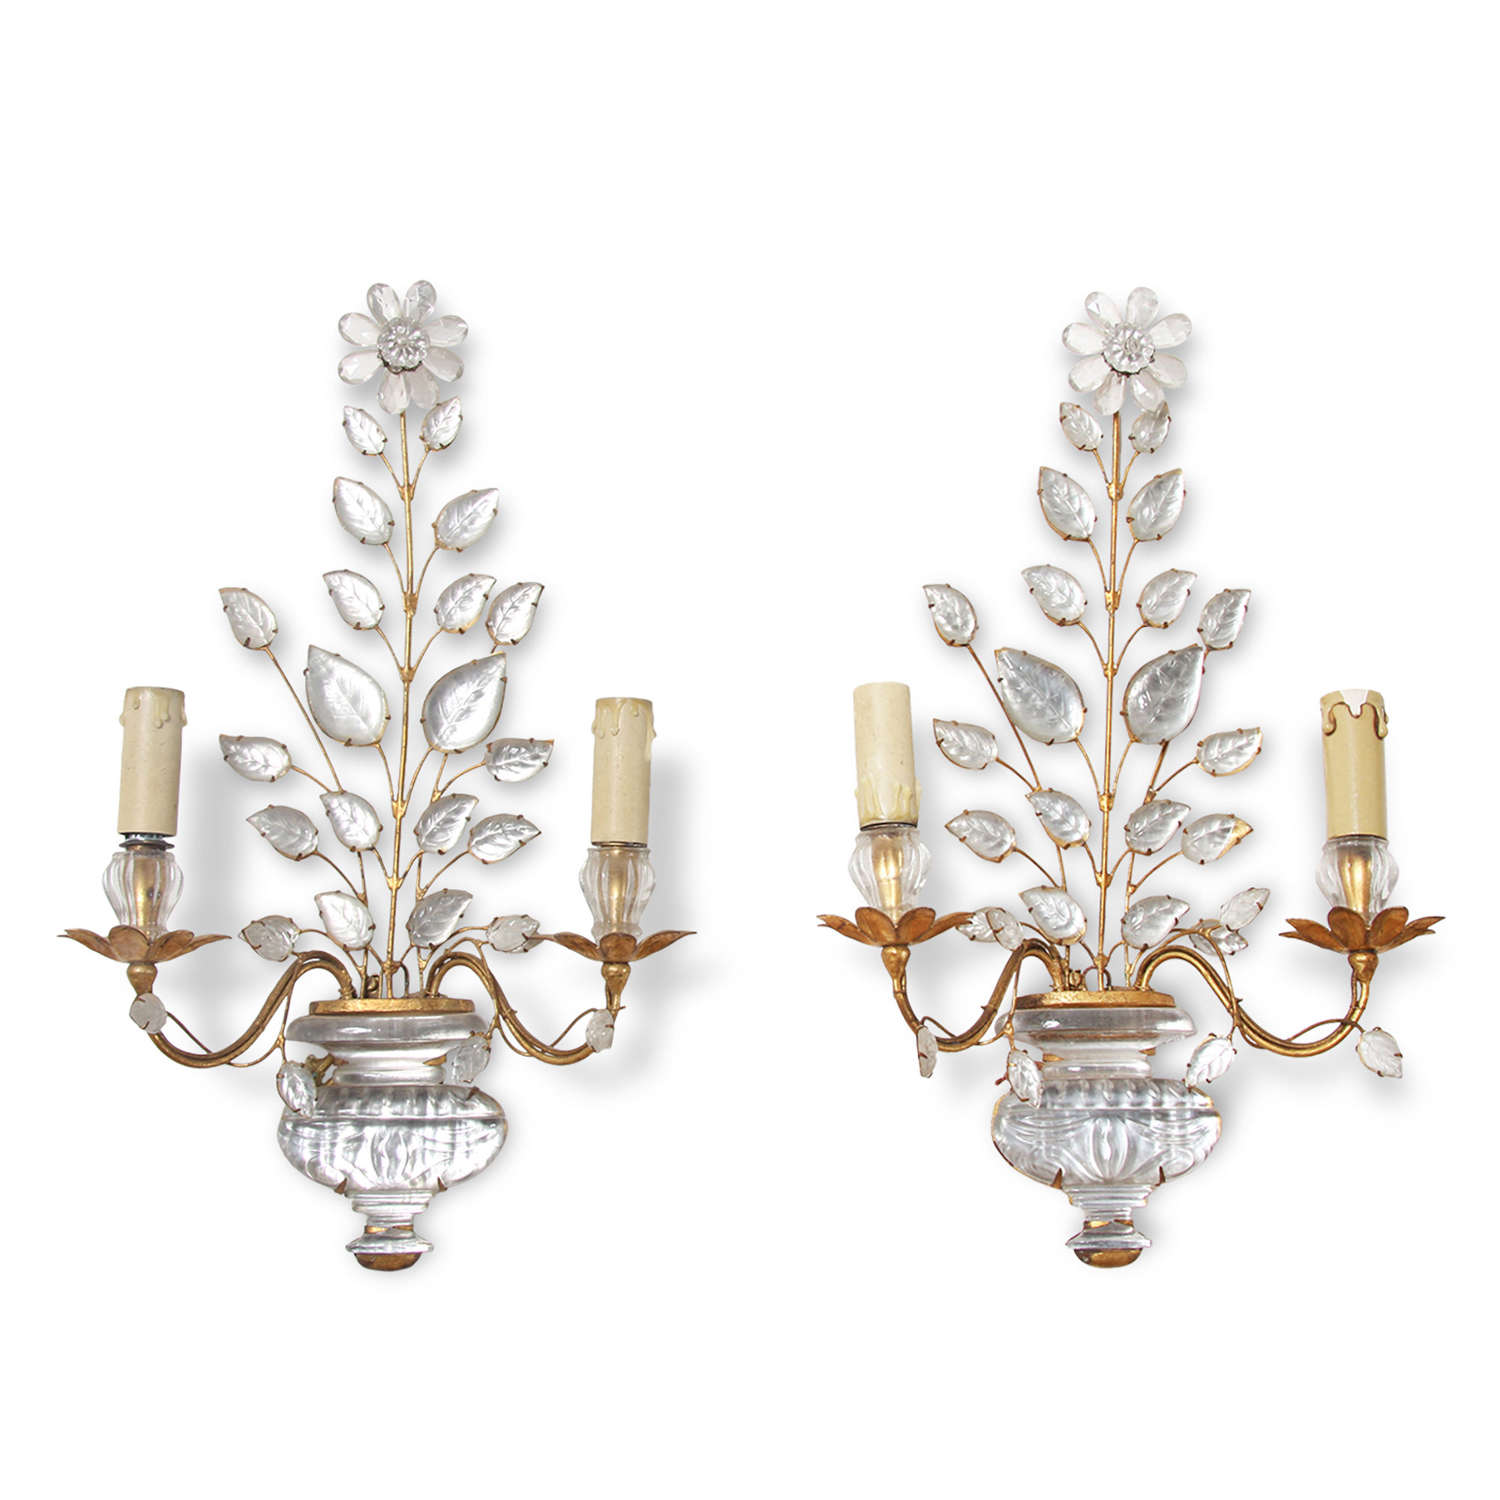 Pair of French Mid-Century Baguès Wall Sconces With Floral Motifs